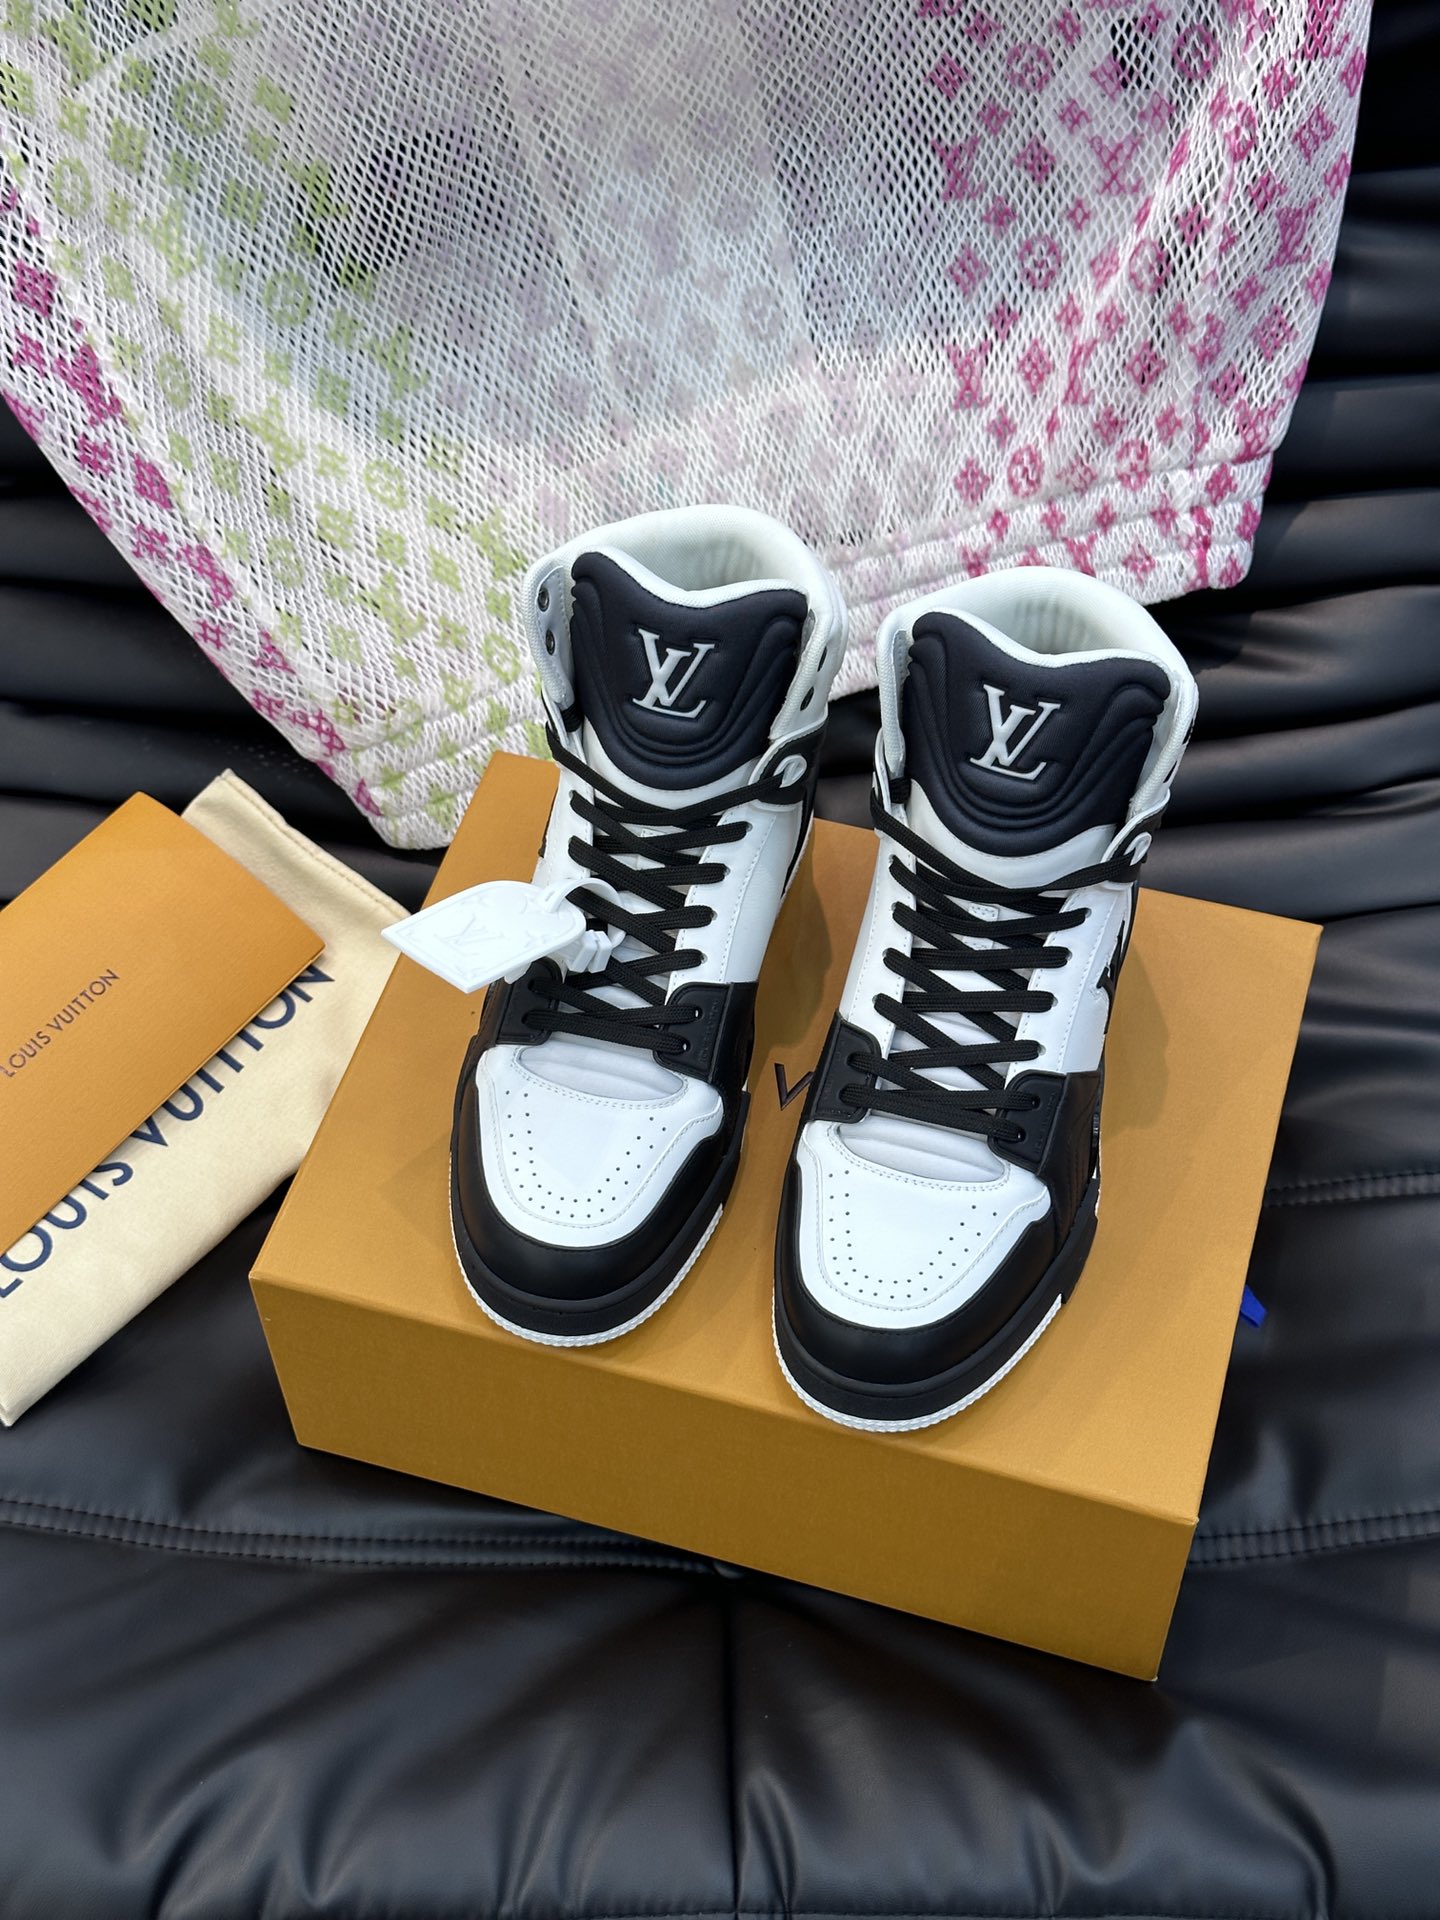 Louis Vuitton High
 Shoes Sneakers Cowhide TPU Fall/Winter Collection Fashion High Tops